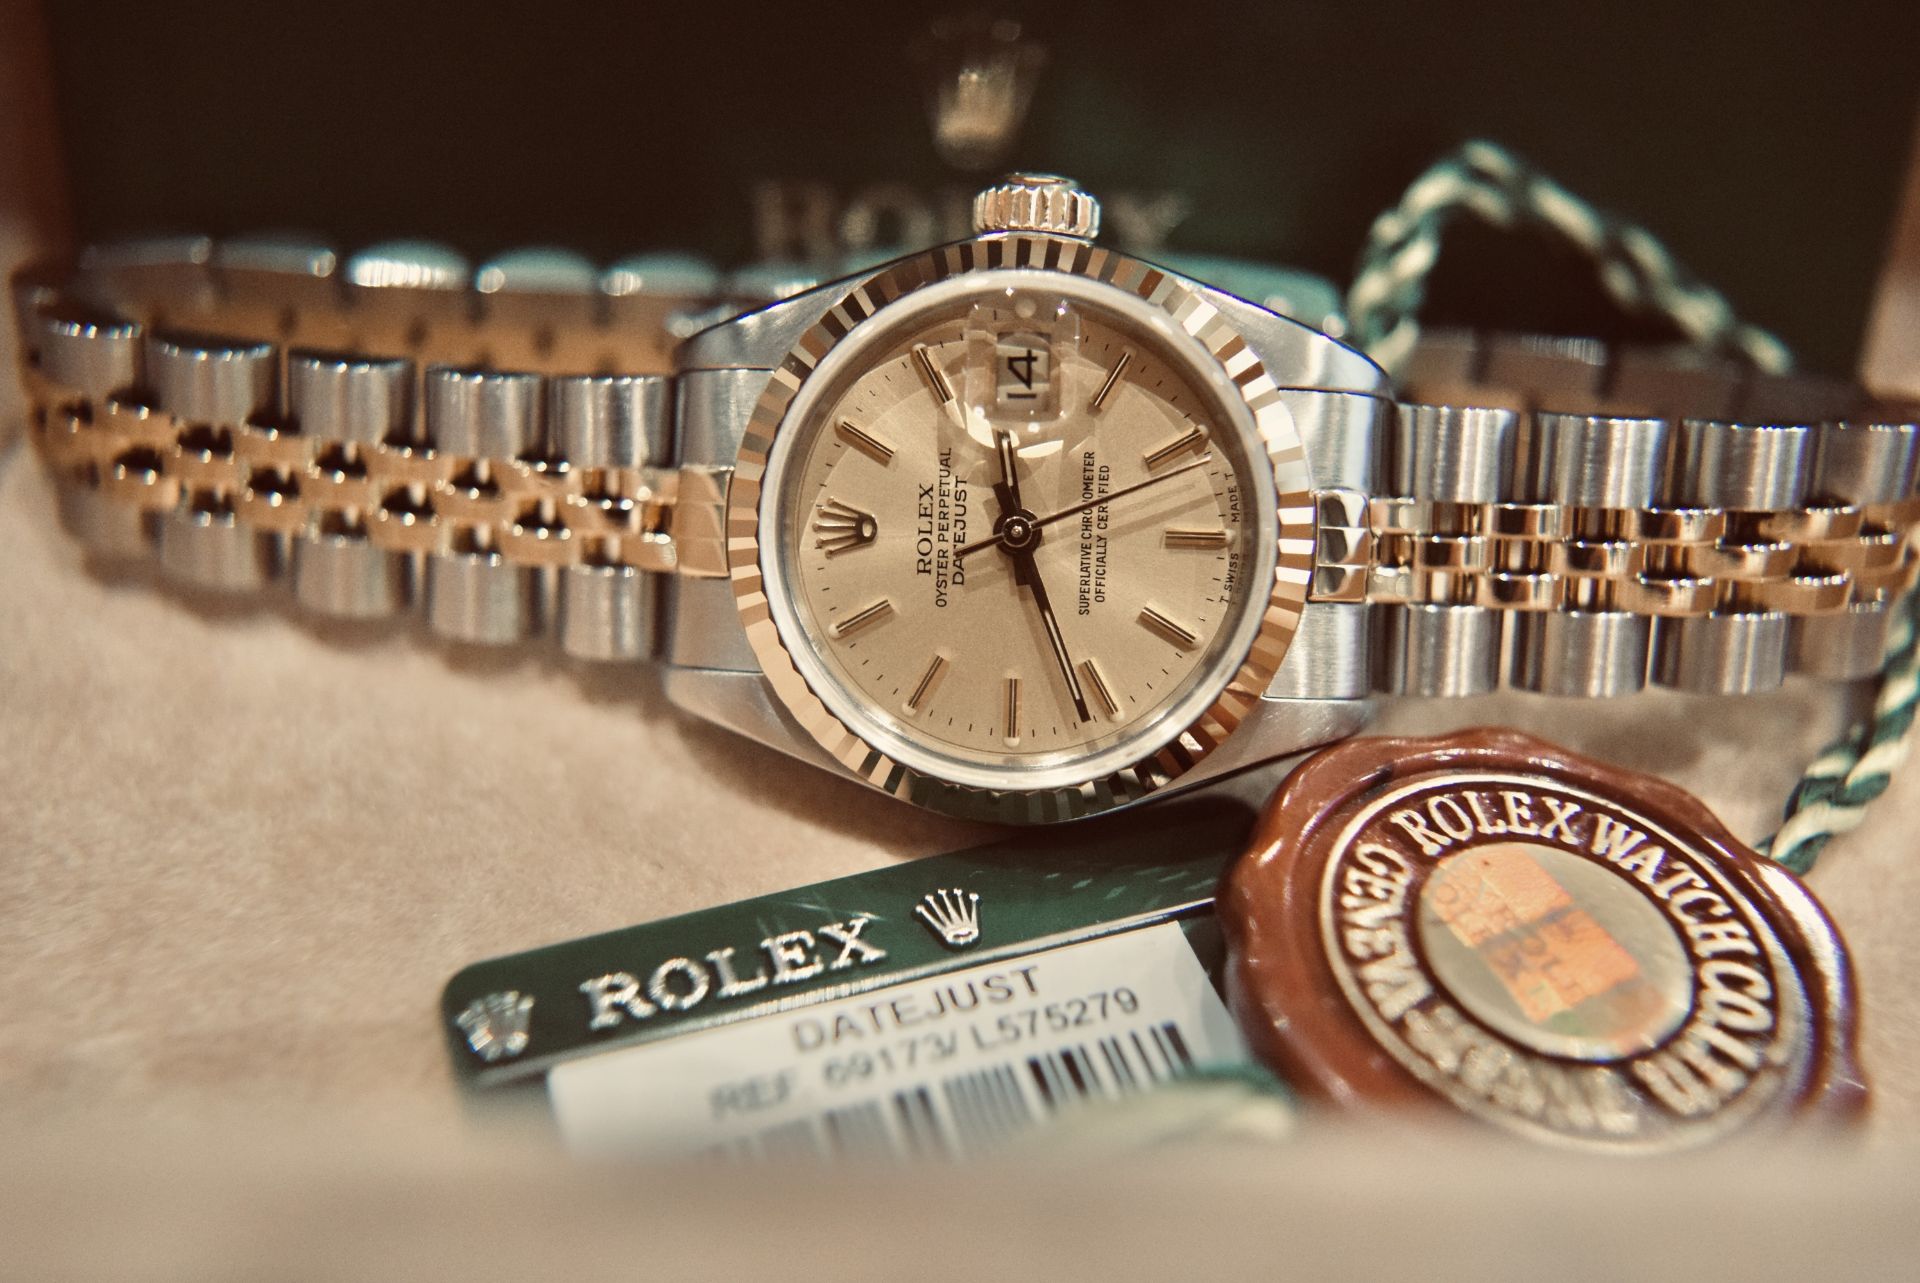 ROLEX DATEJUST REF. 69173 OYSTER PERPETUAL / CHAMPAGNE 26MM LADIES MODEL - Image 18 of 18